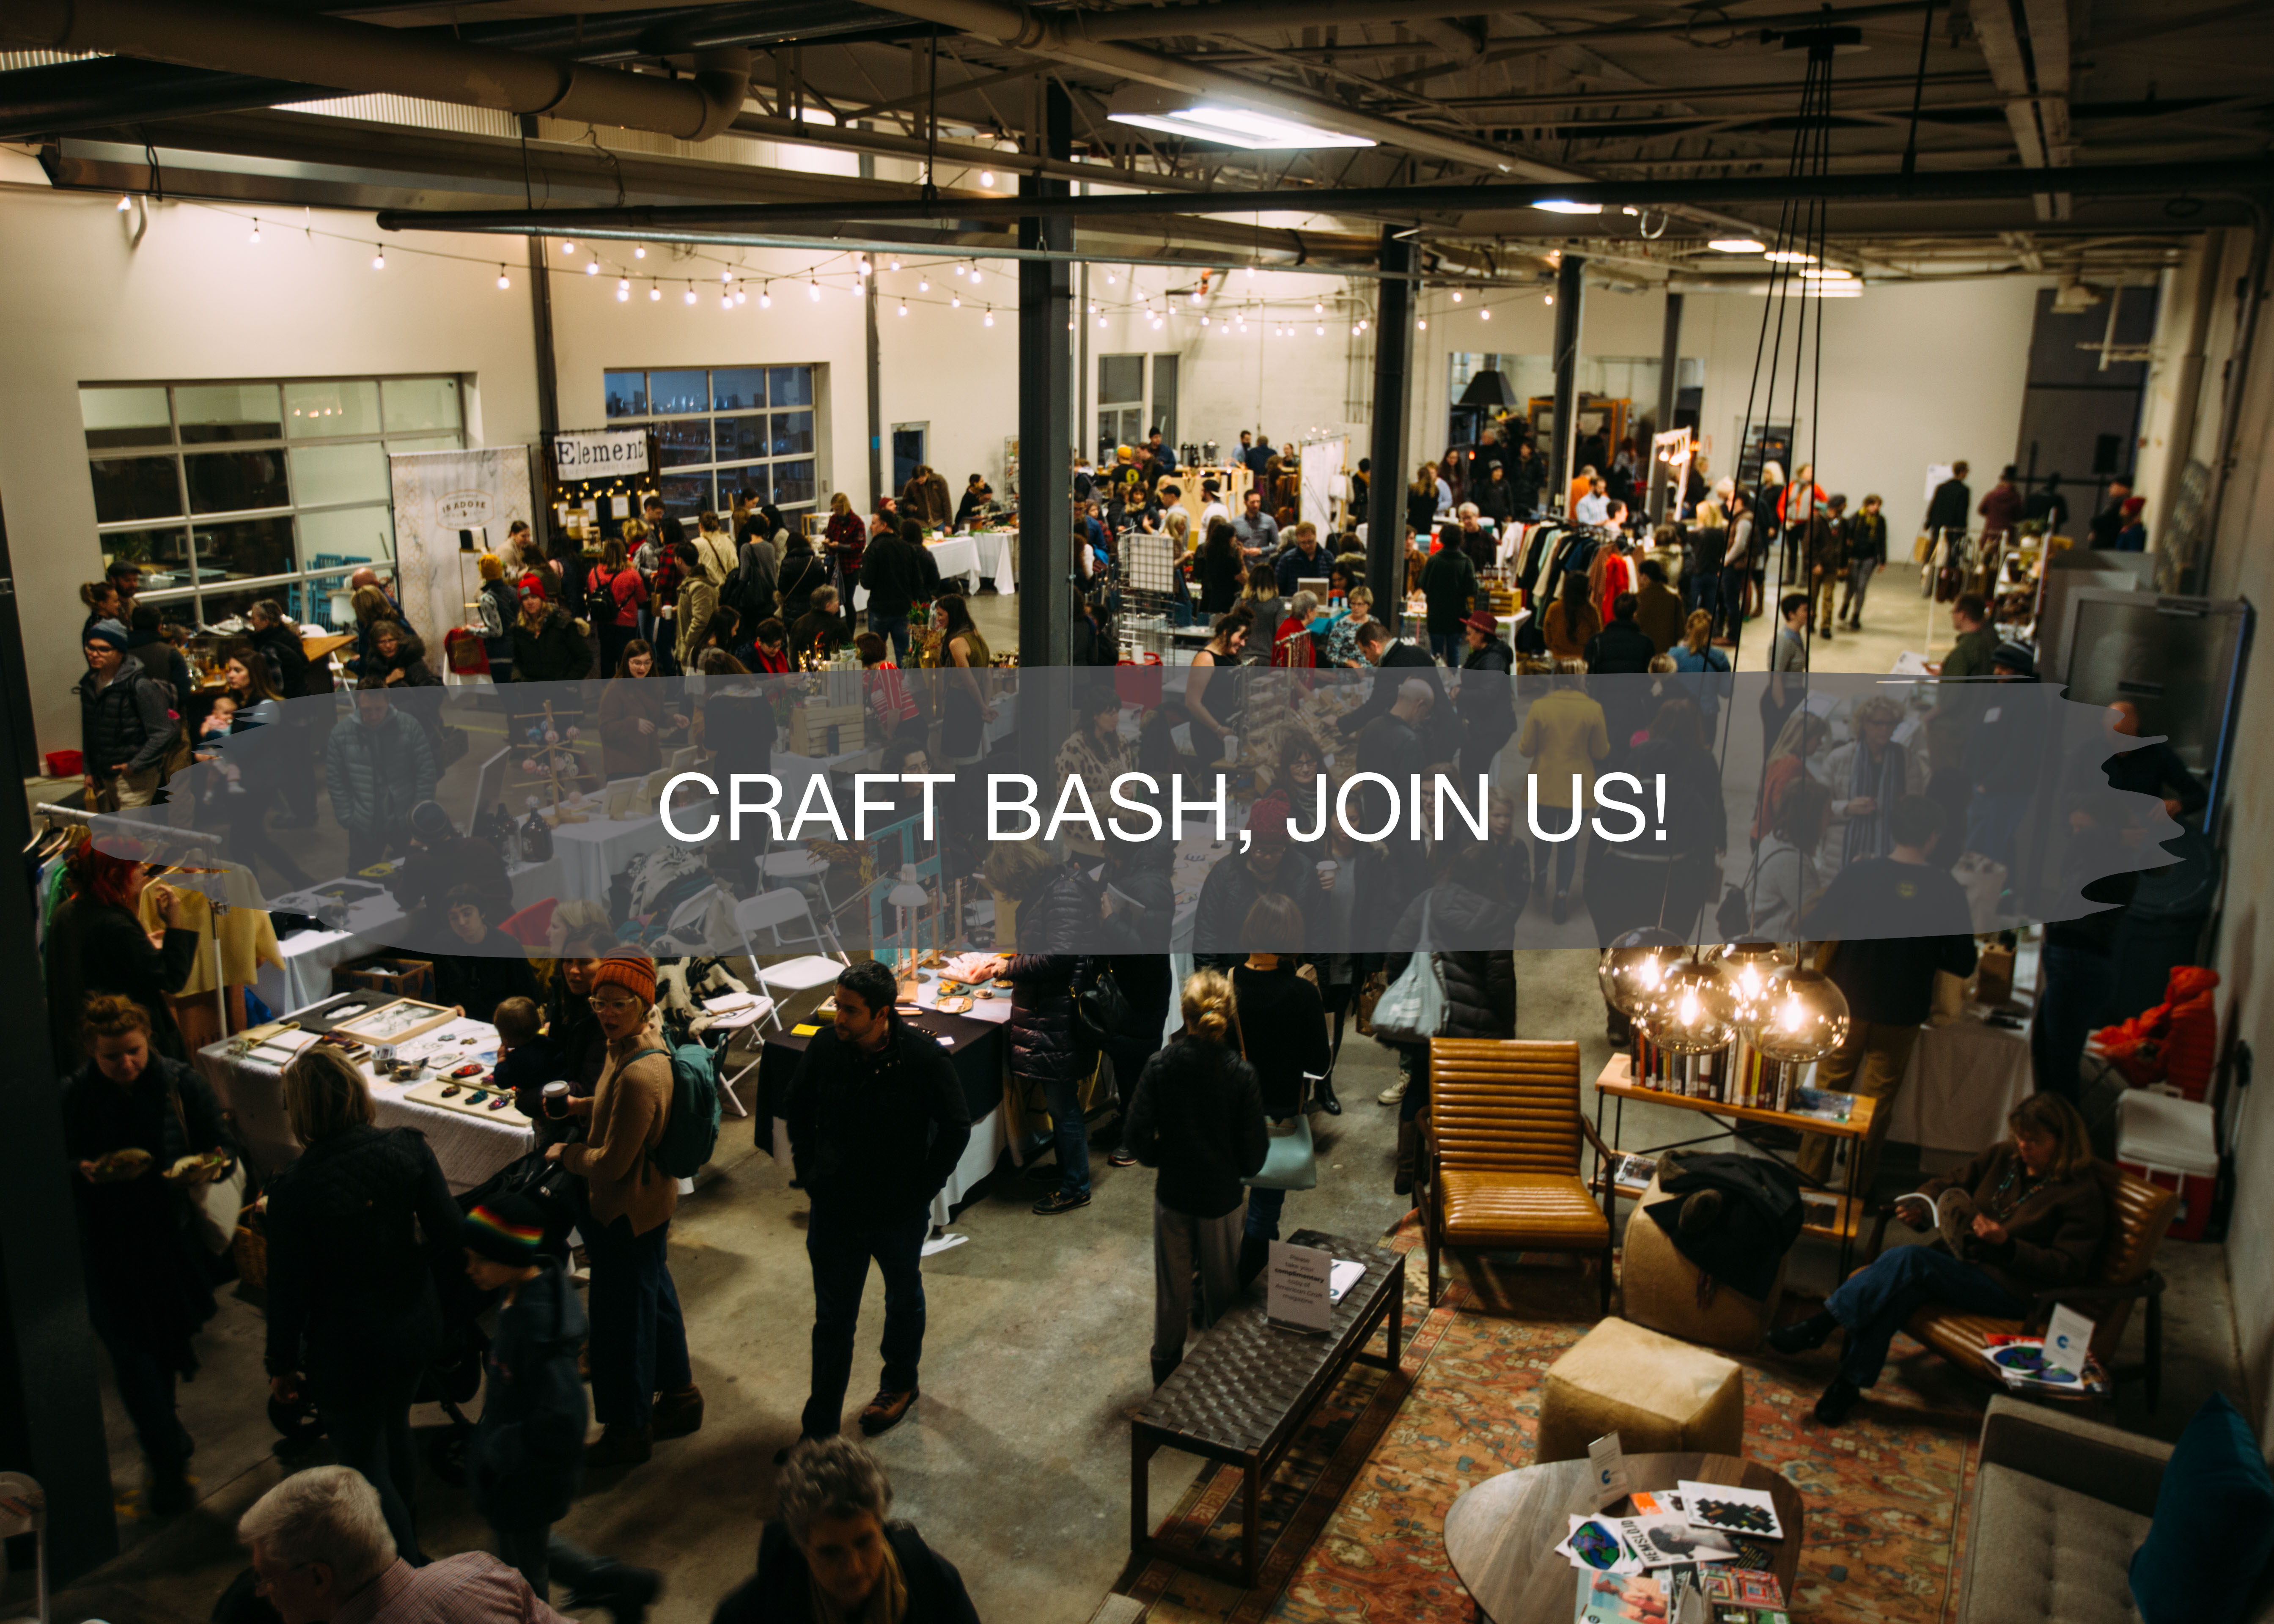 Craft Bash with American Craft Council, Join us! 1